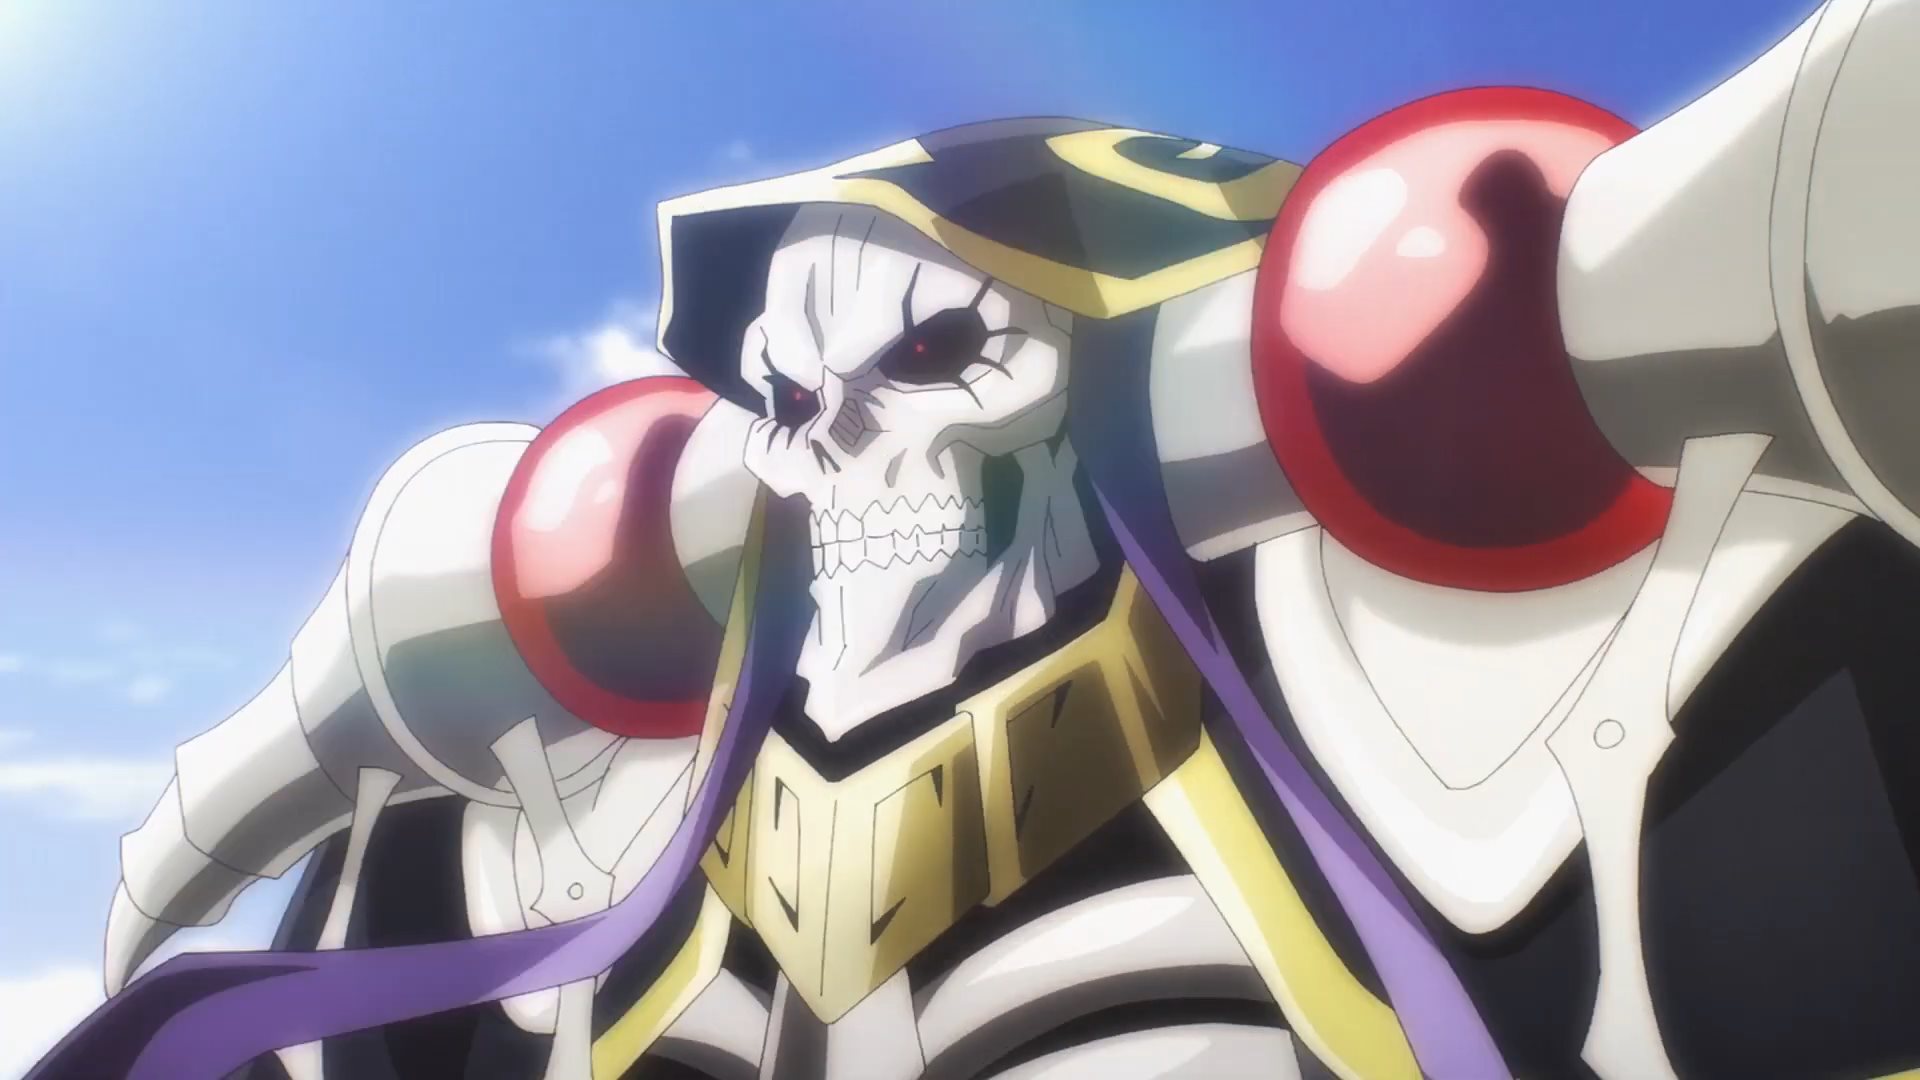 Anime Corner - JUST IN: Overlord Season 4 revealed July